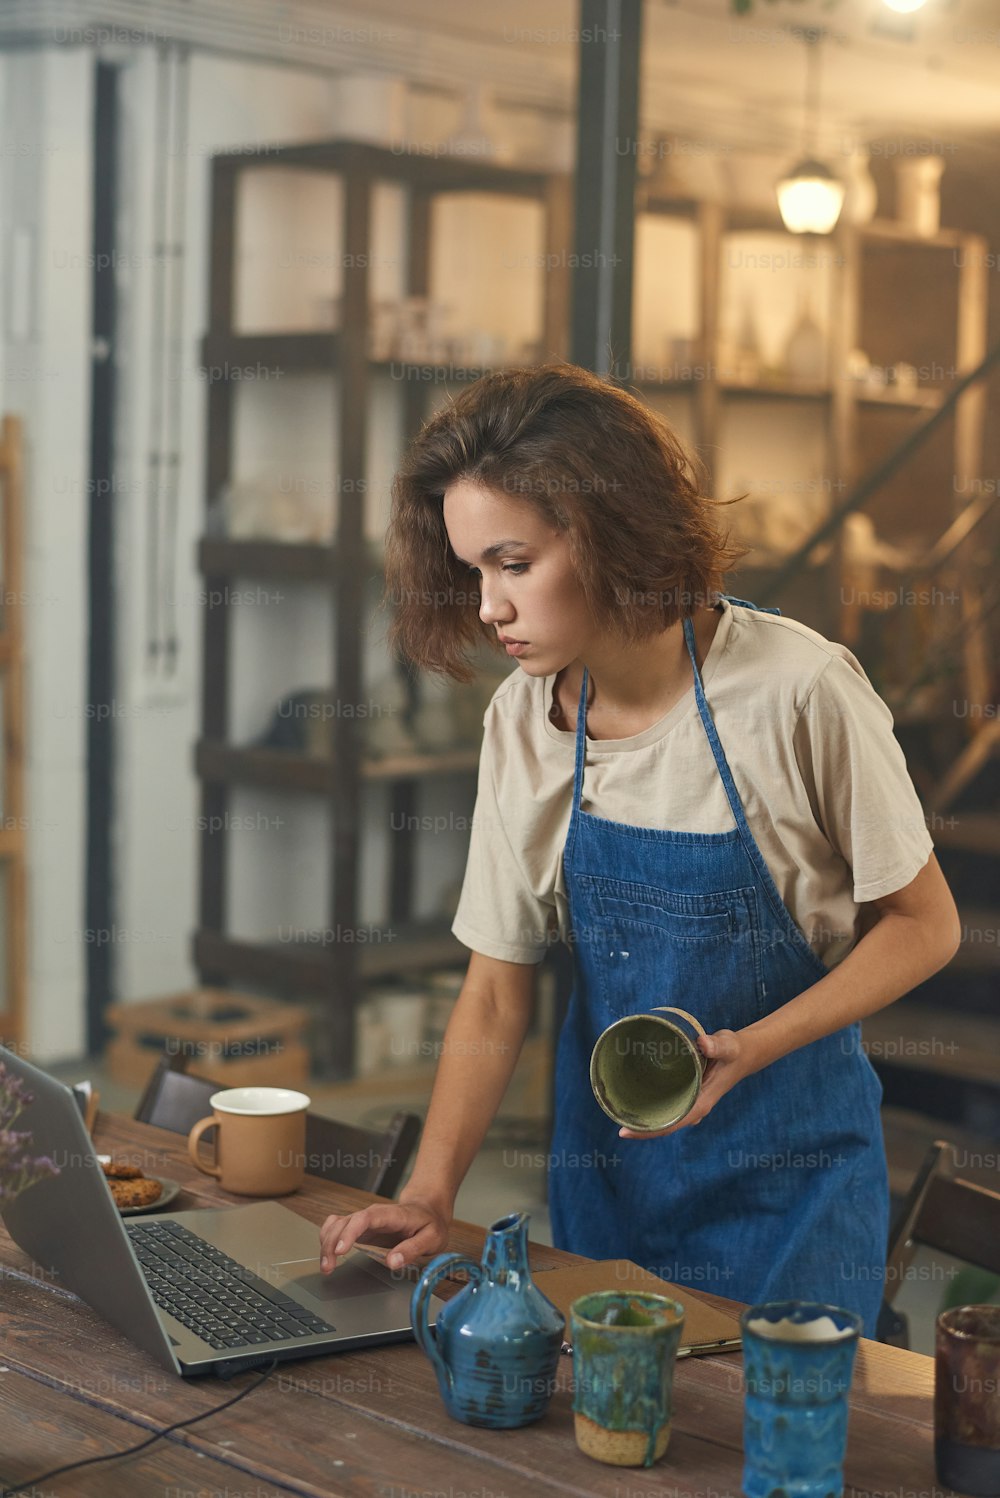 Craftswoman with handmade mug standing by table and looking at laptop screen while watching online video